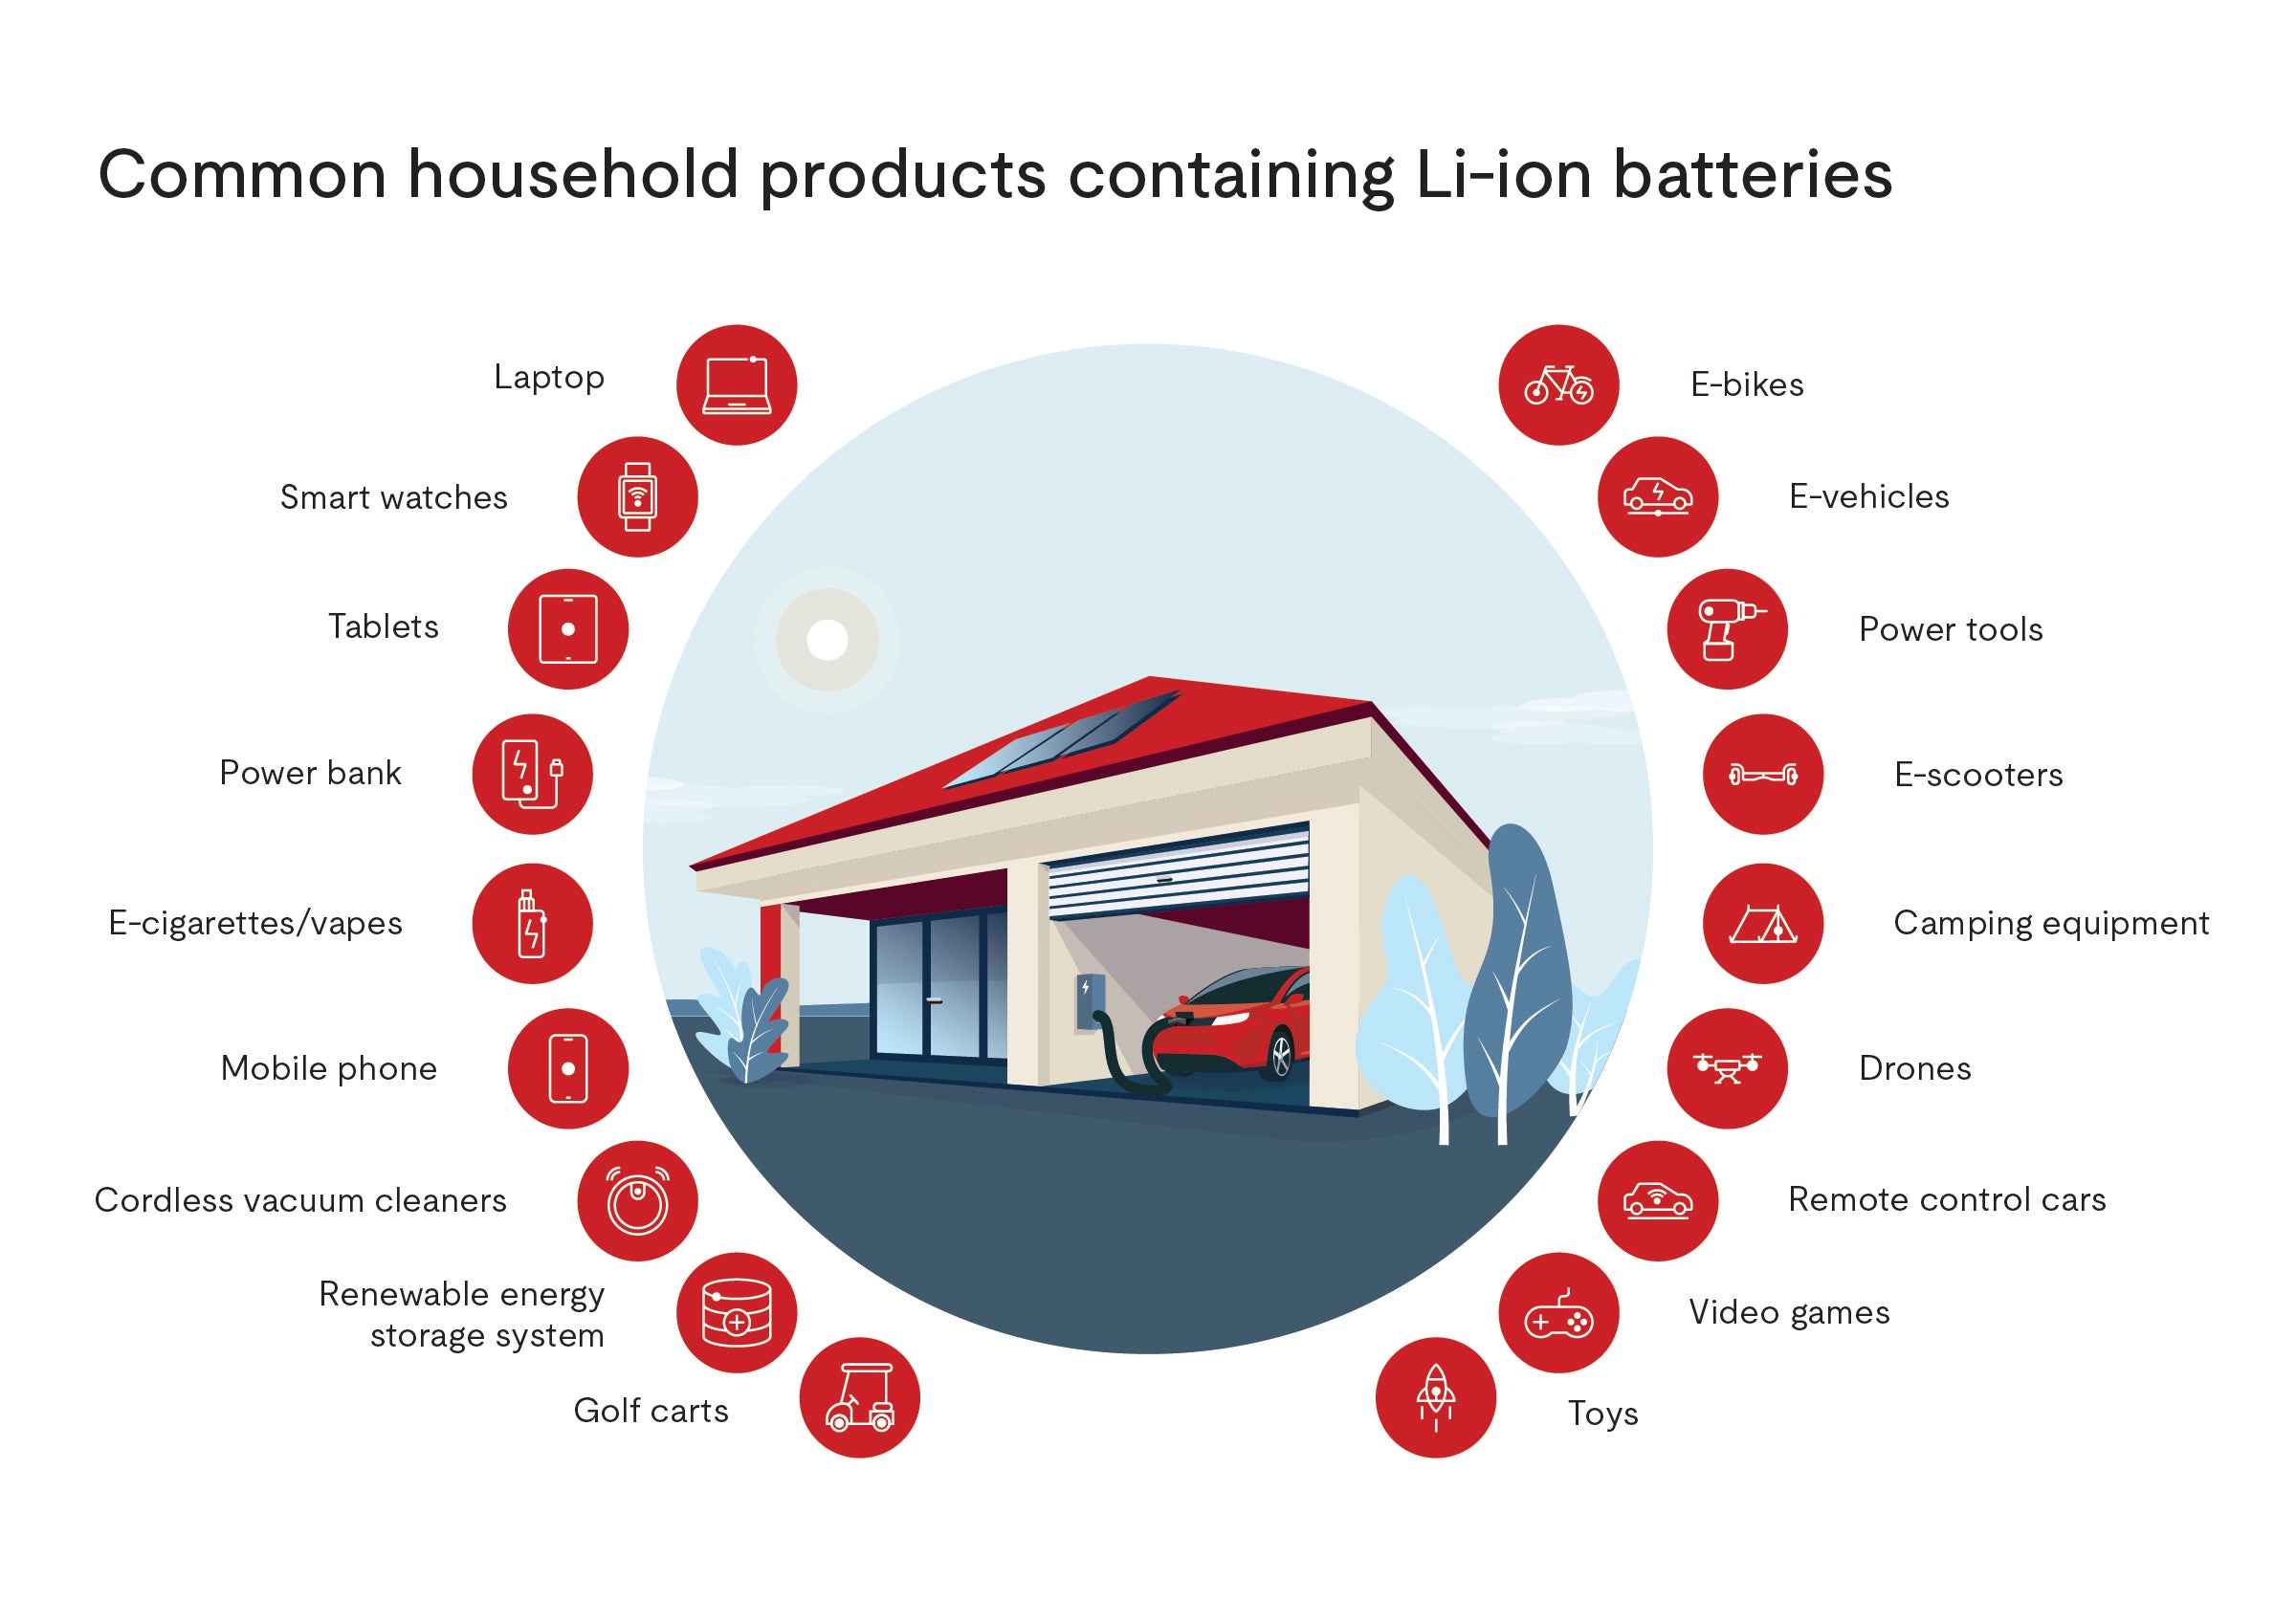 Common household products containing Li-ion batteries.